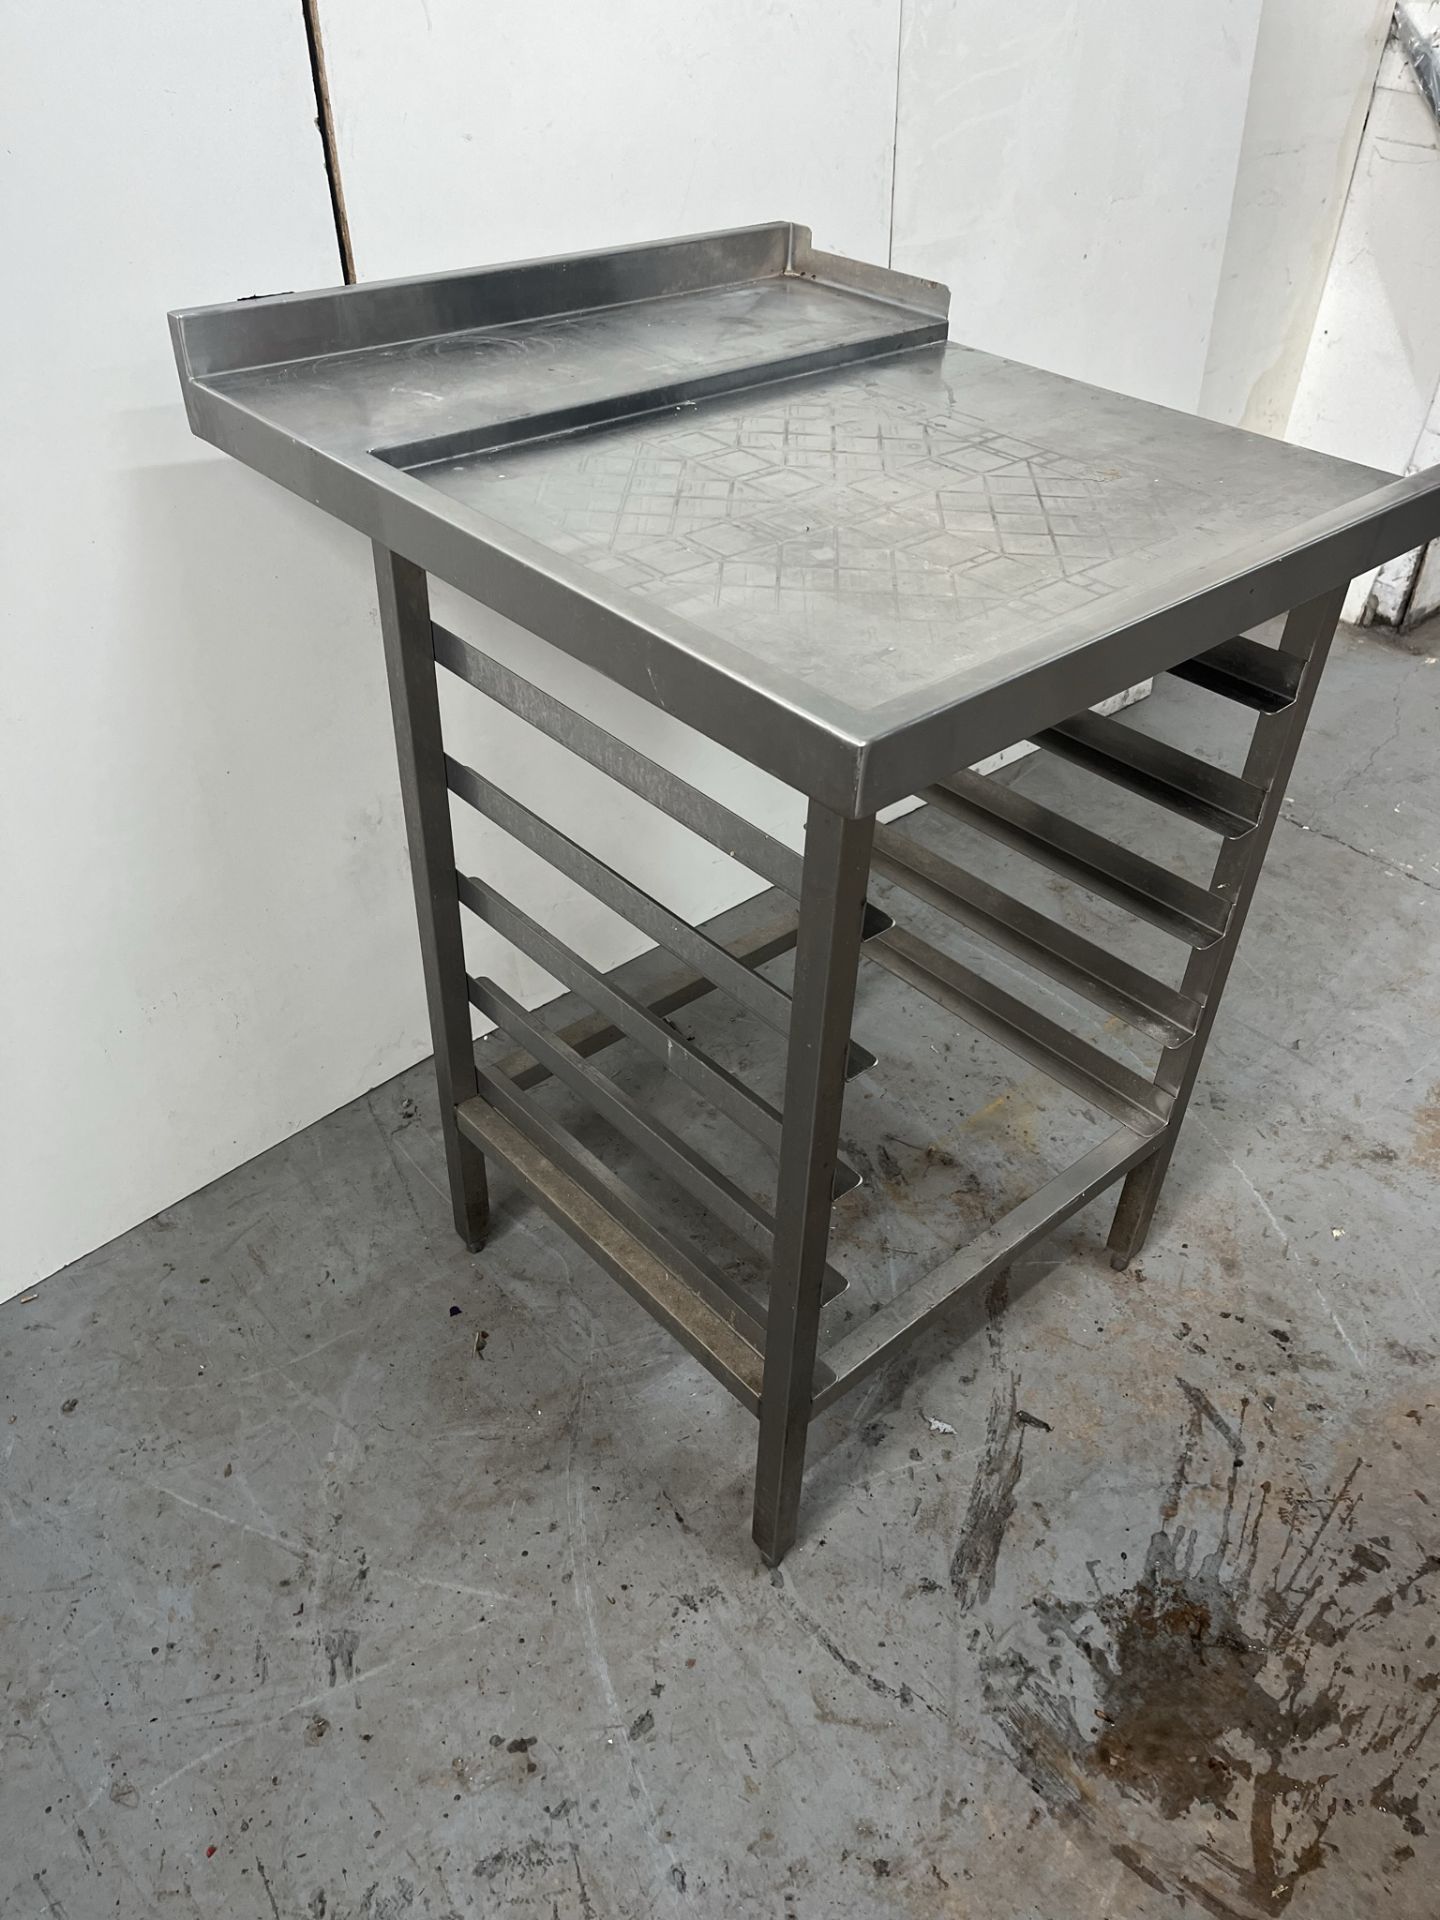 700mm Stainless Steel Catering Preperation Table - Image 2 of 5